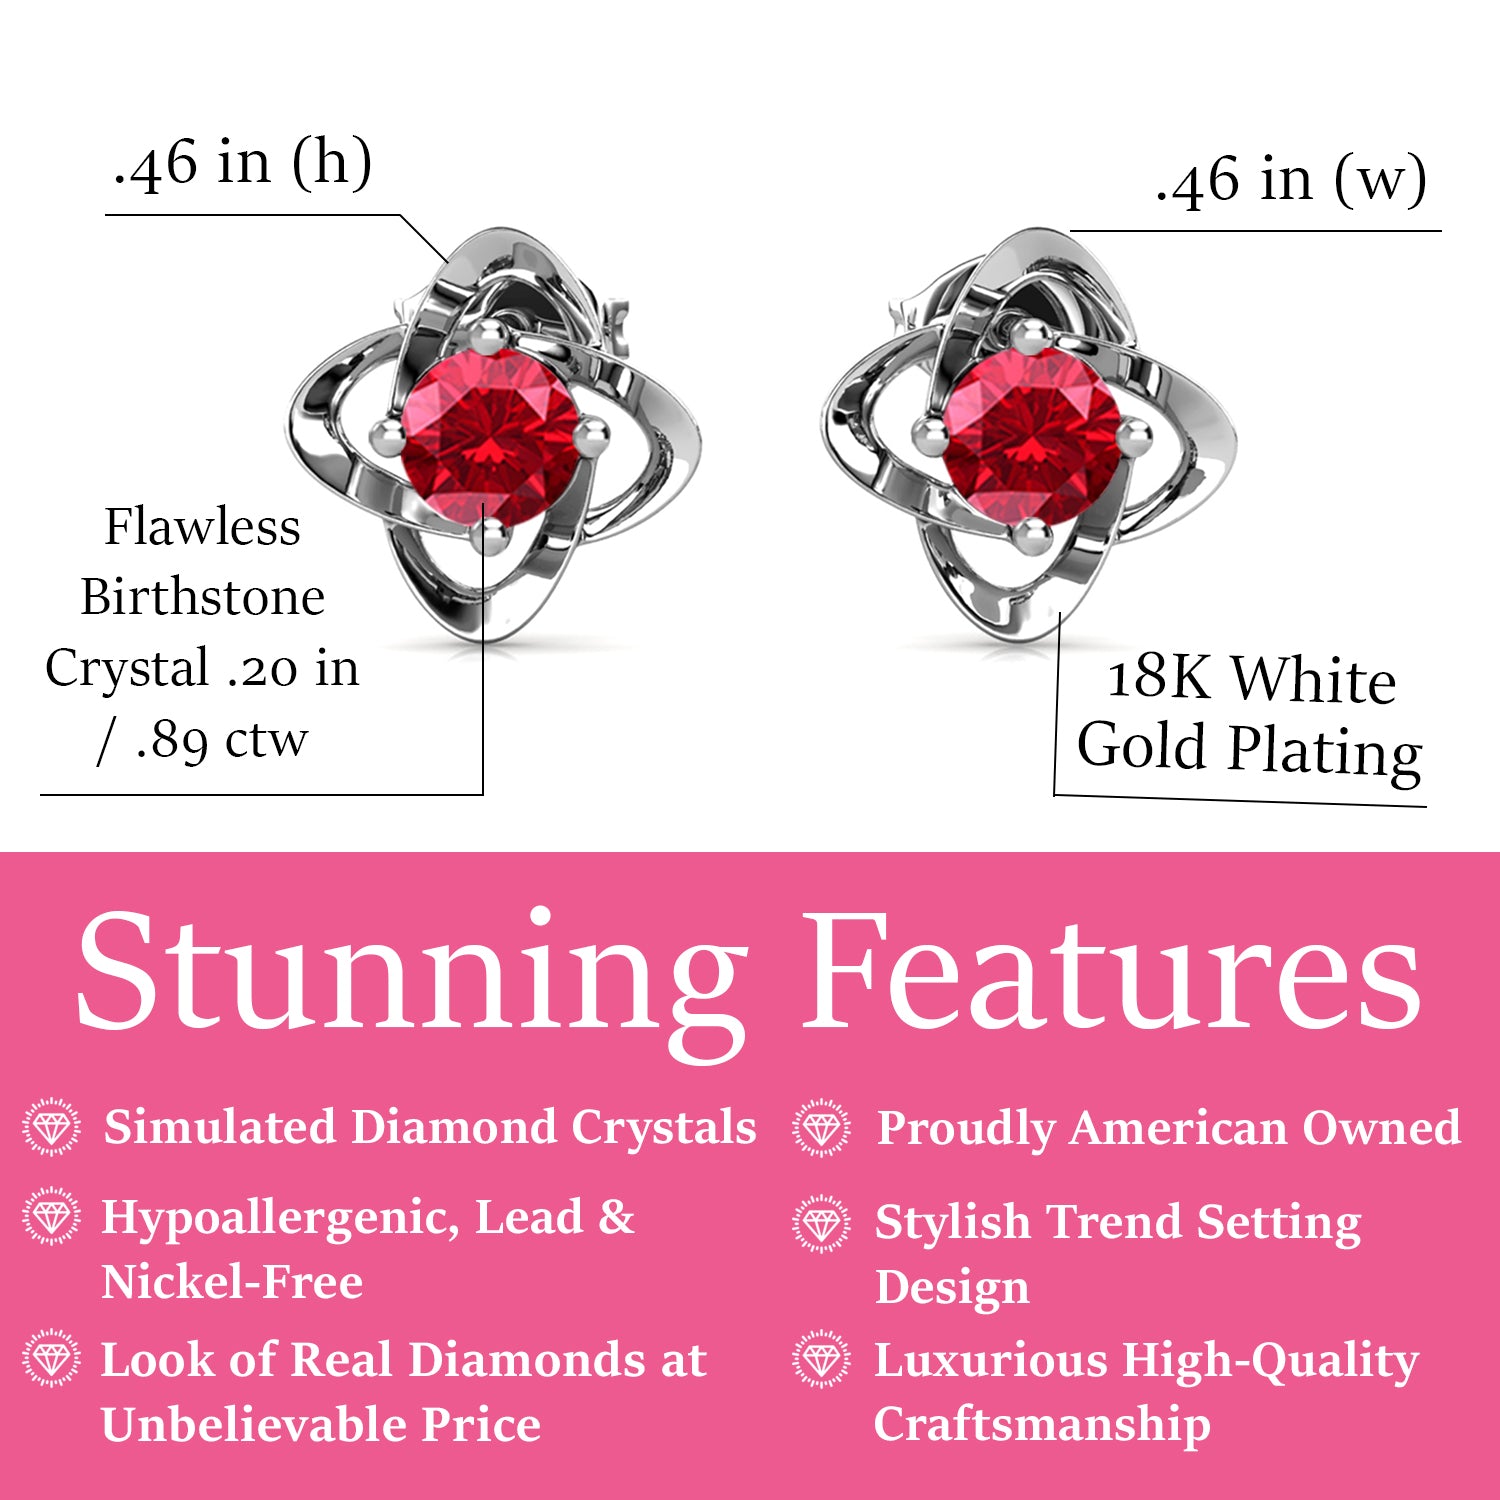 Infinity July Birthstone Ruby Earrings, 18k White Gold Plated Silver Birthstone Earrings with Crystals